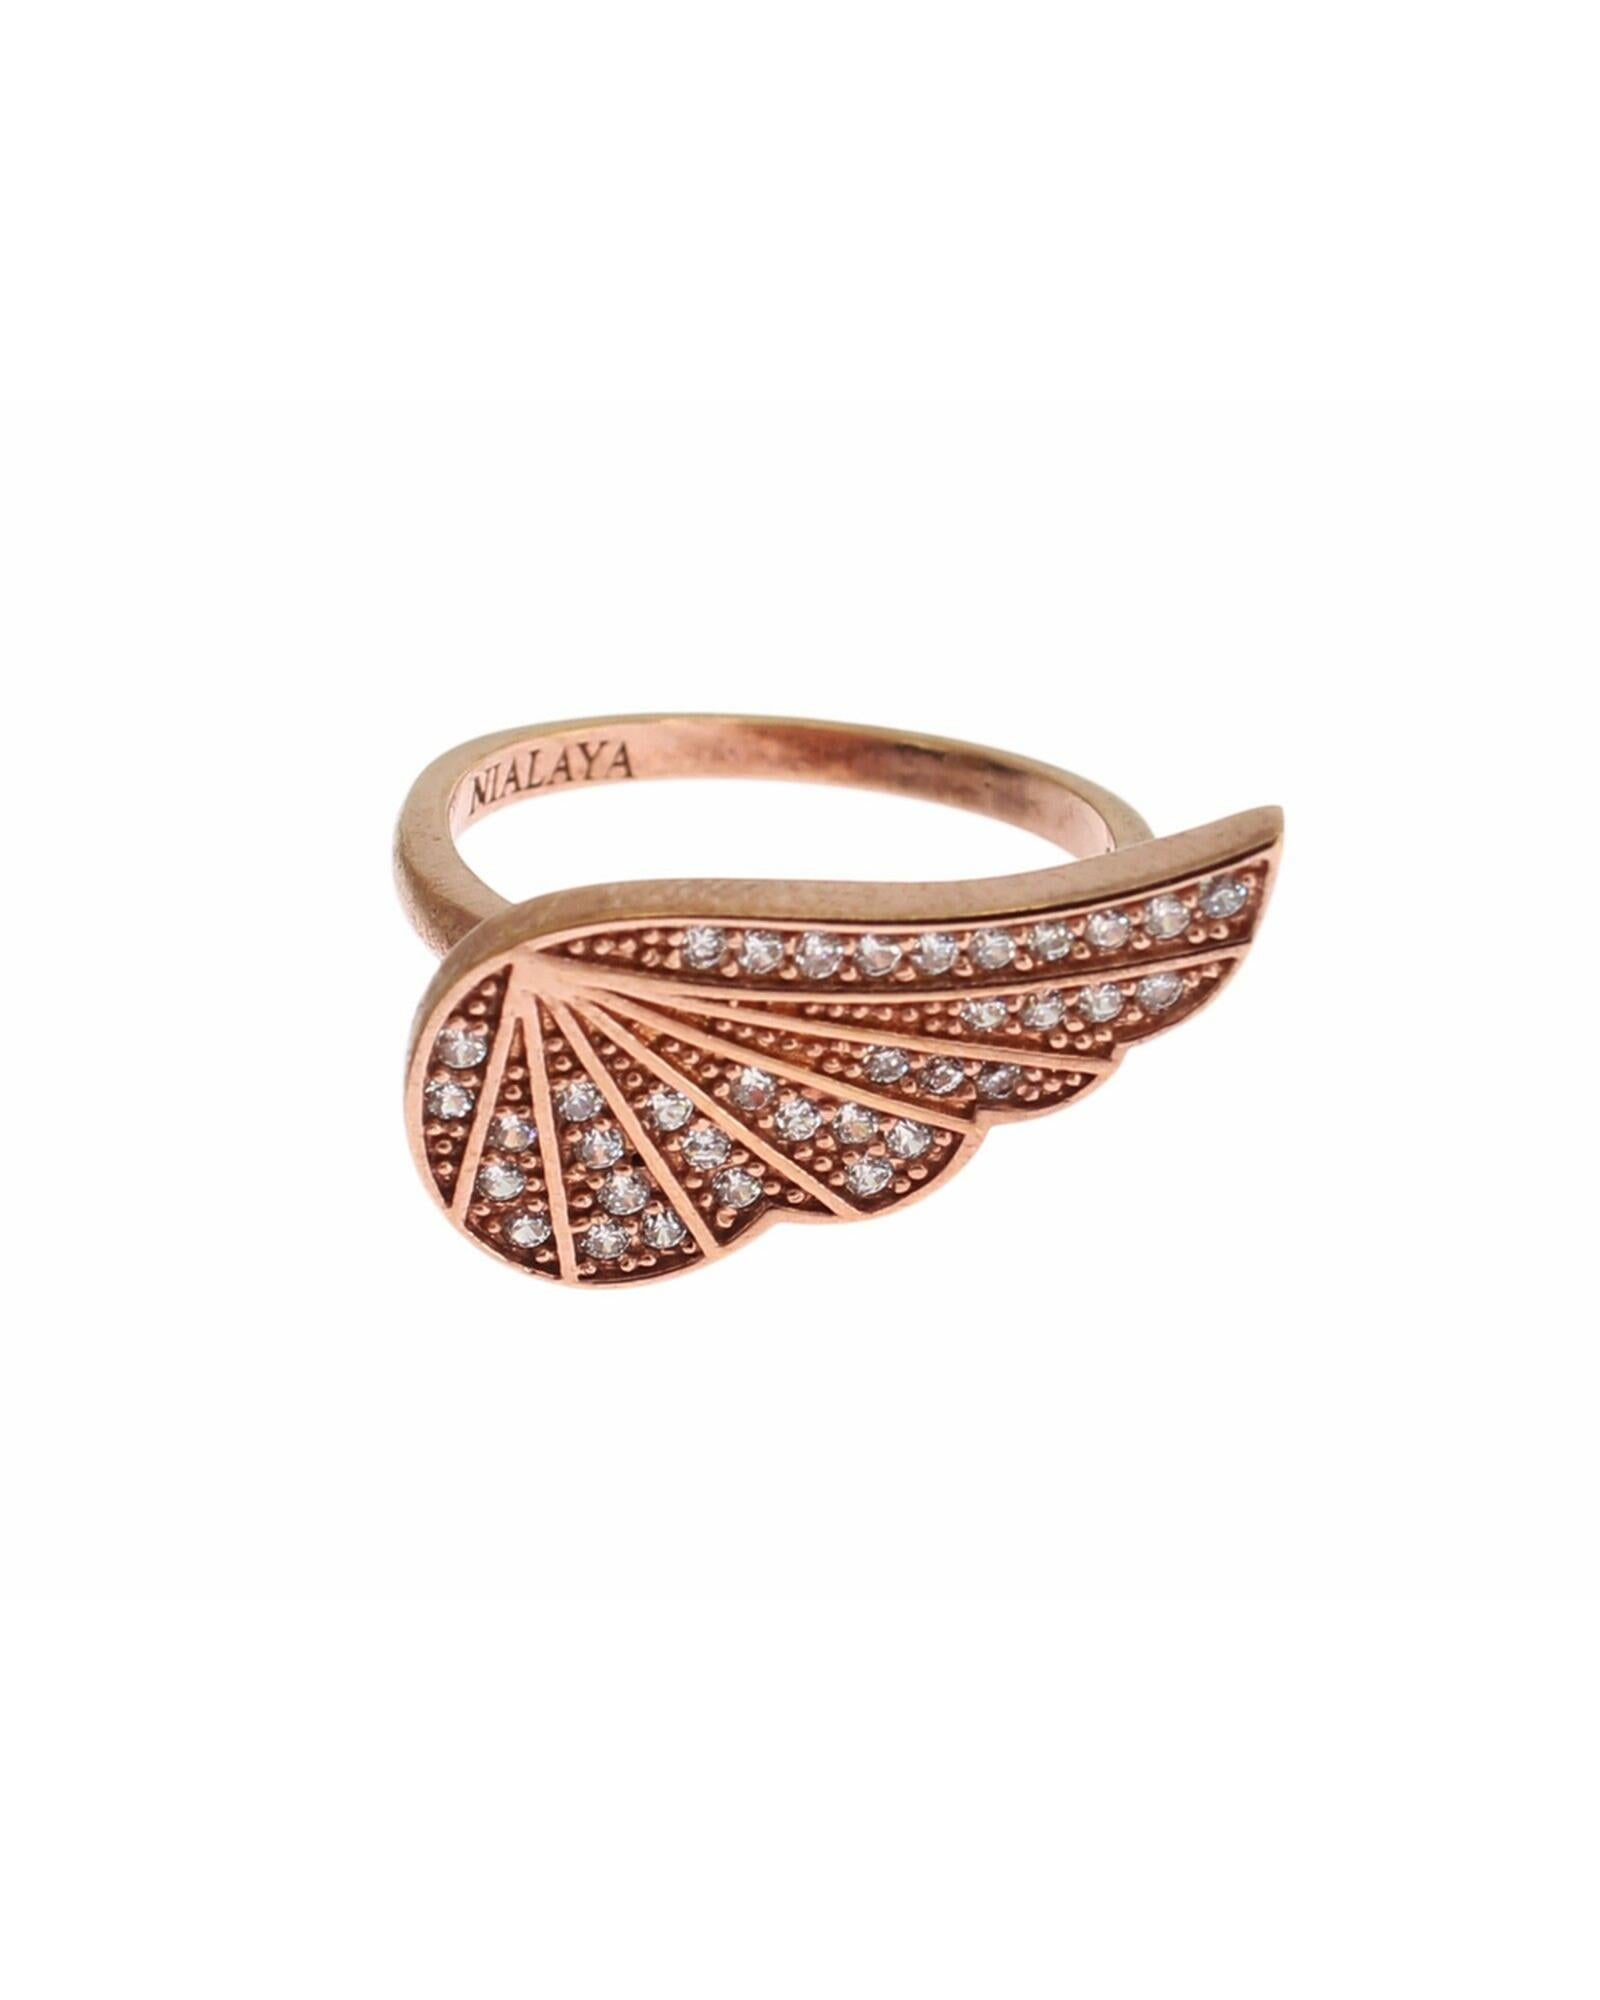 Authentic NIALAYA Ring with Pink Gold Plating and Clear CZ Crystals 50 EU Women